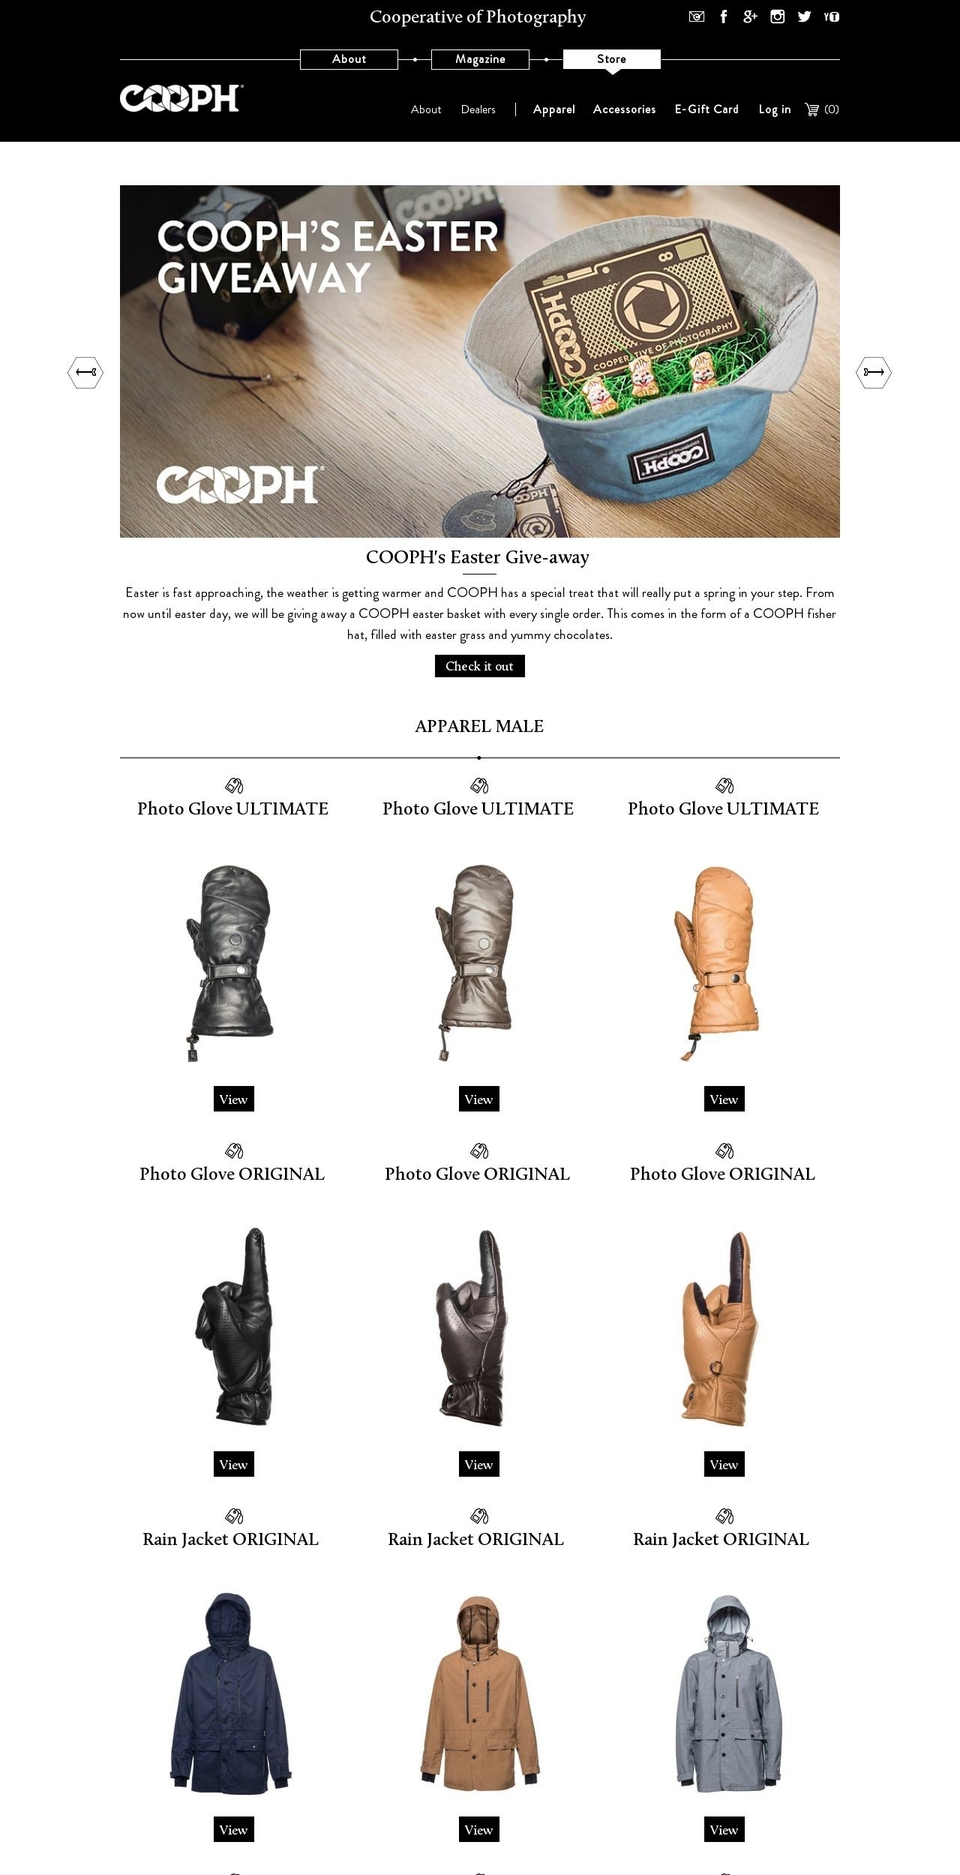 Impulse Shopify theme site example cooph.com